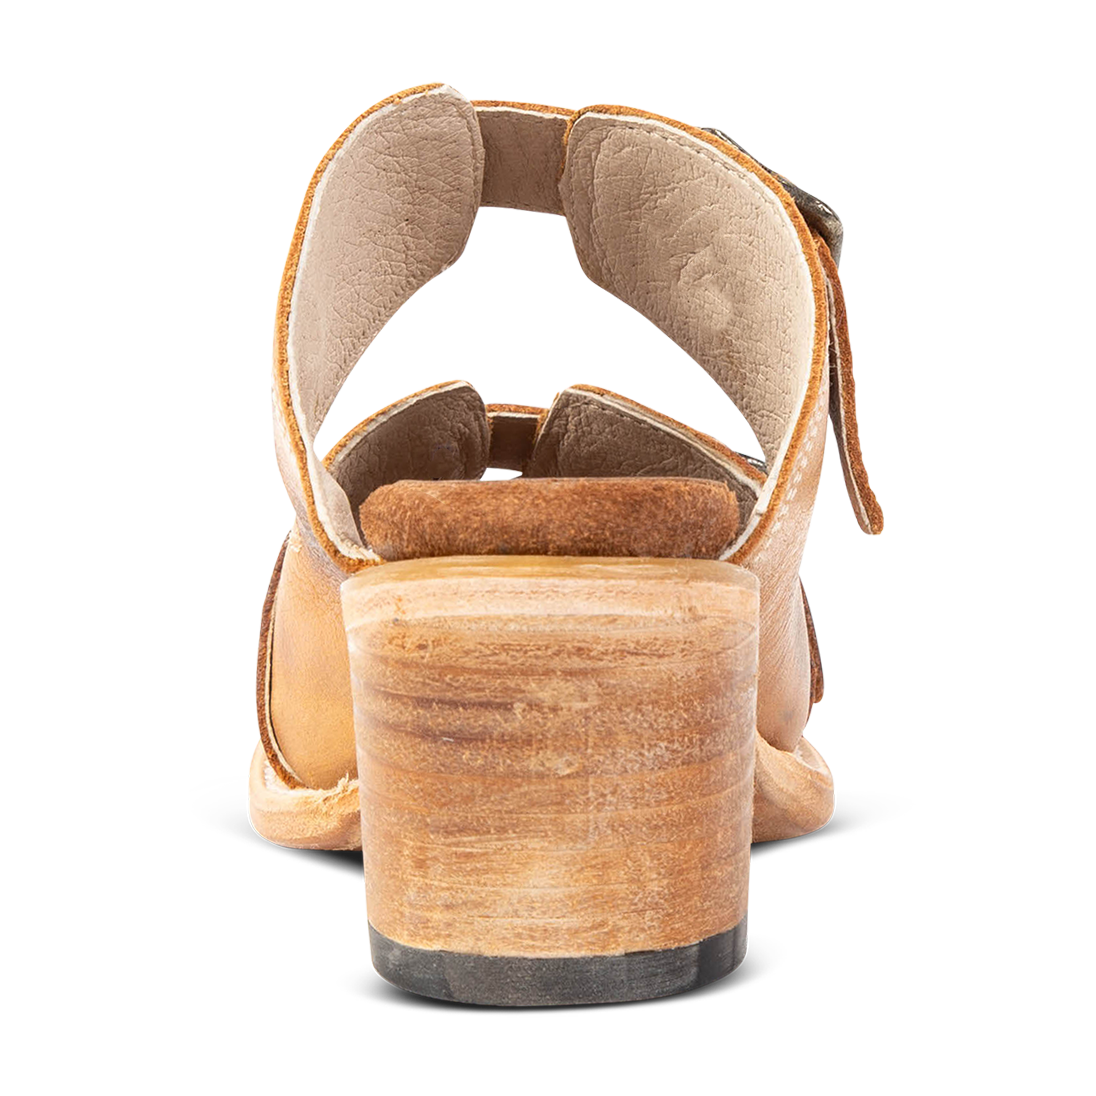 Back view showing leather buckle strap detailing FREEBIRD women's Caprice wheat sandal